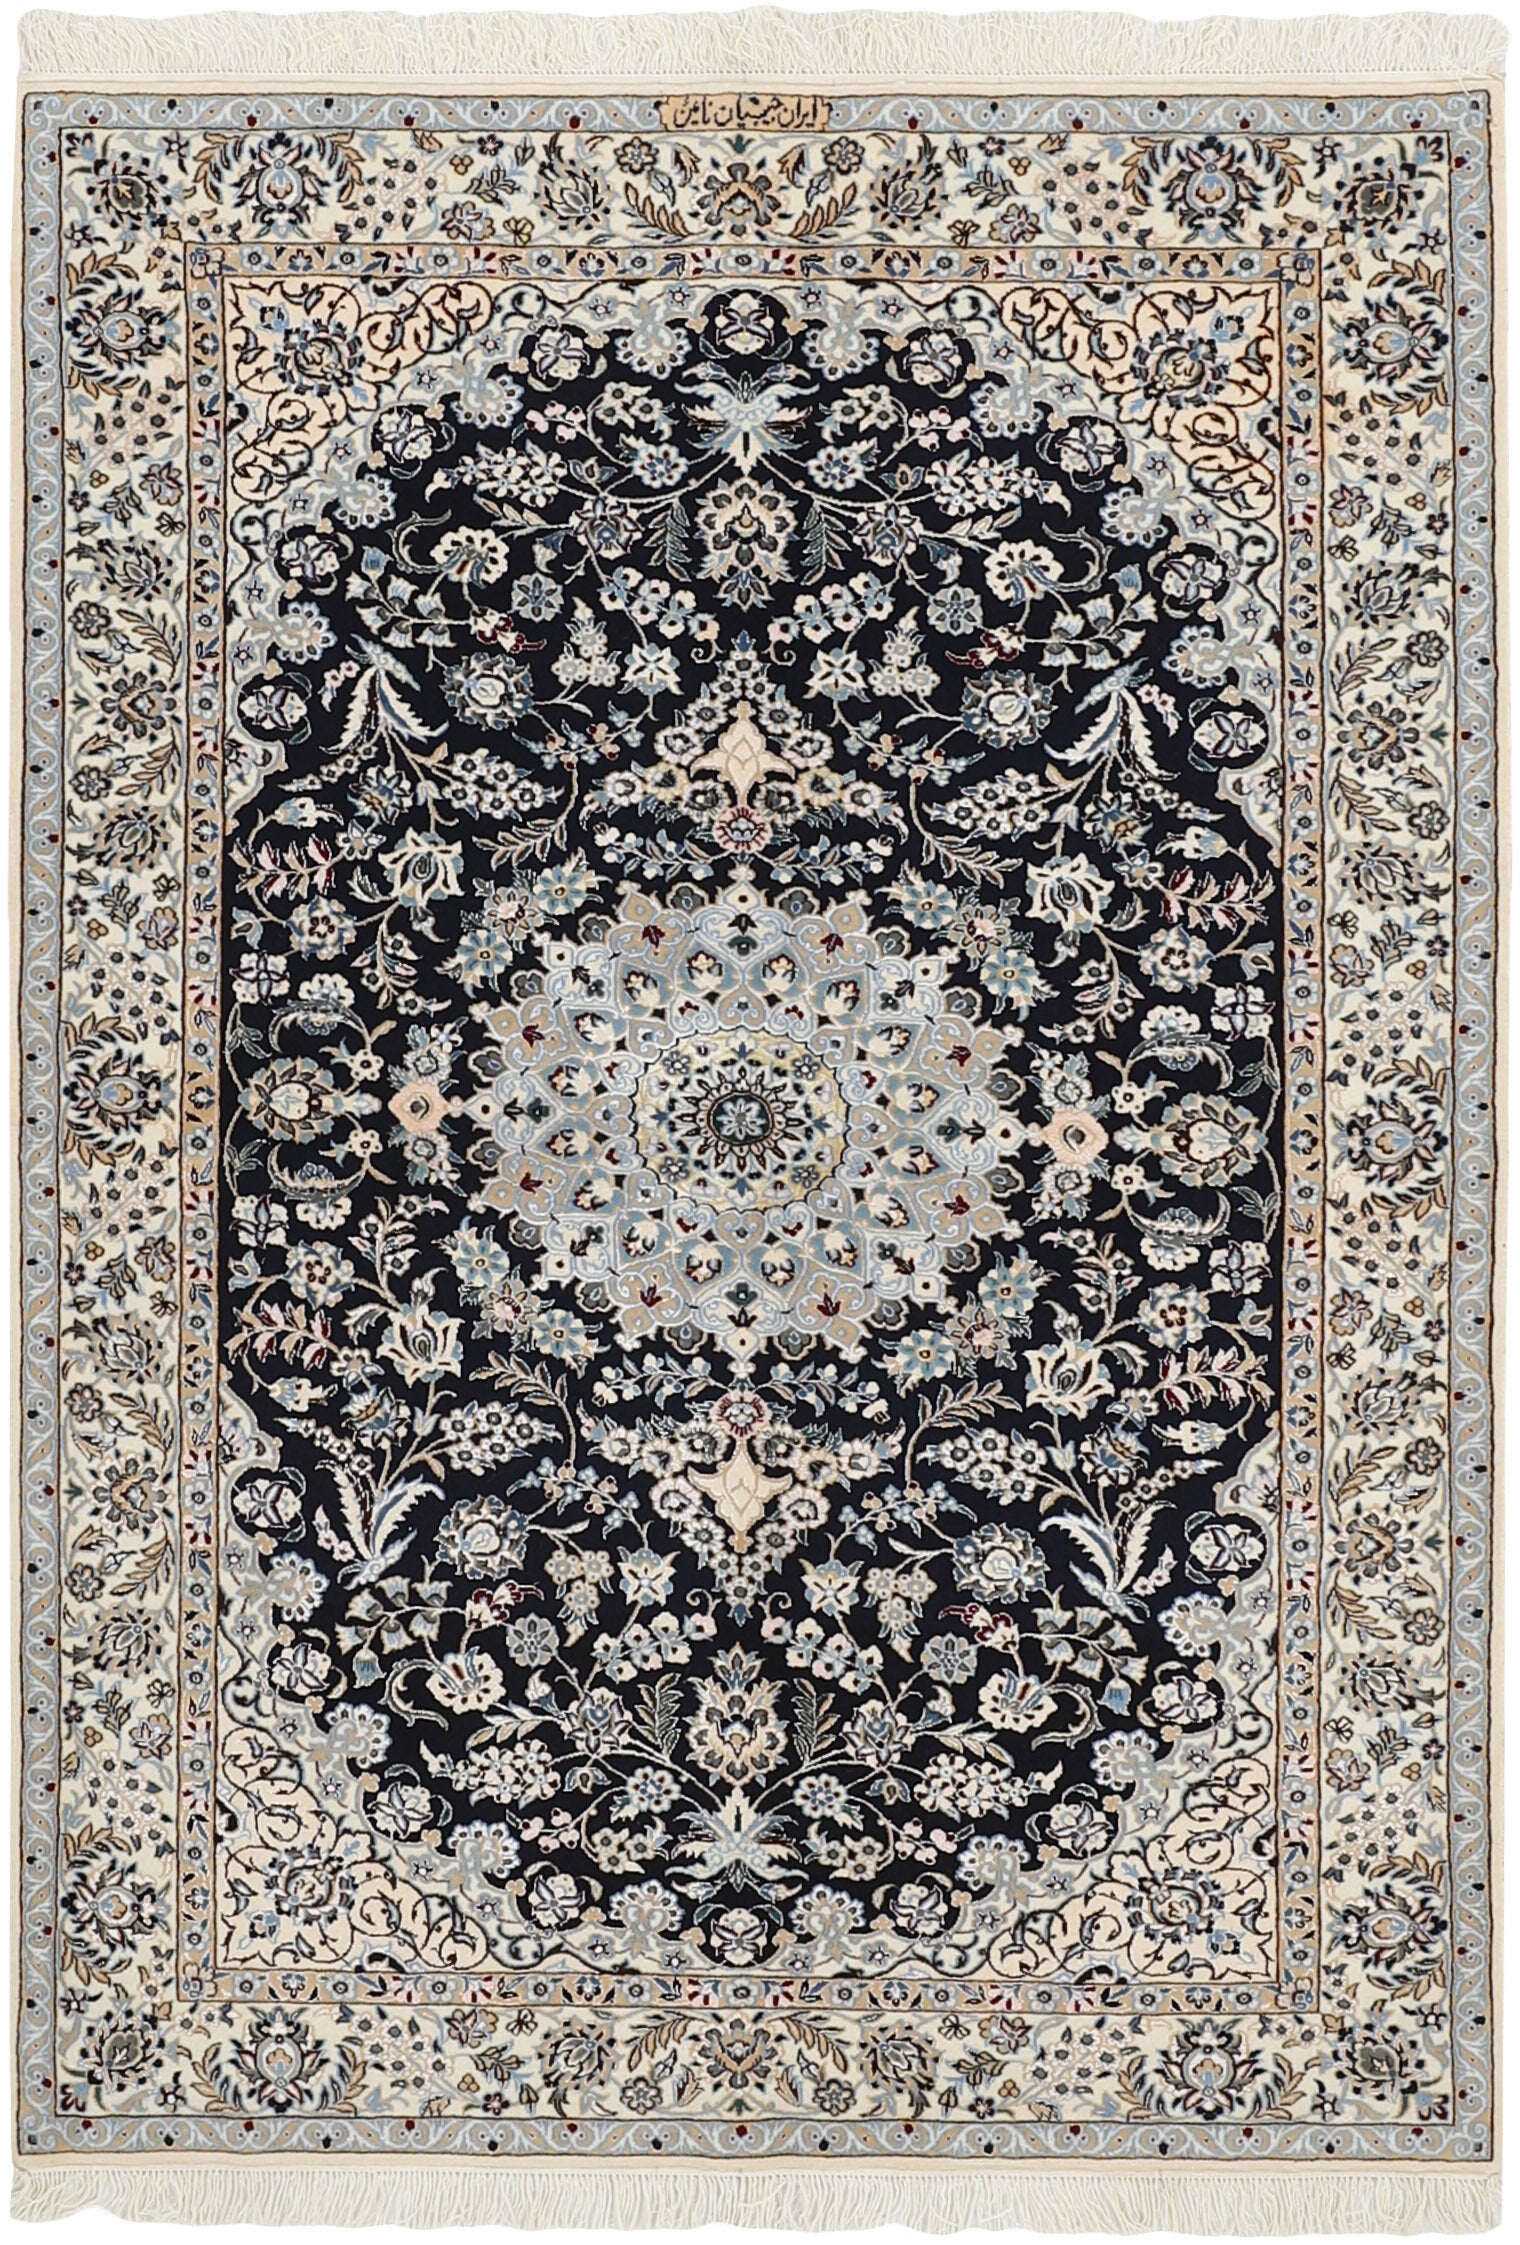 Authentic oriental rug with traditional floral design in cream, red and black